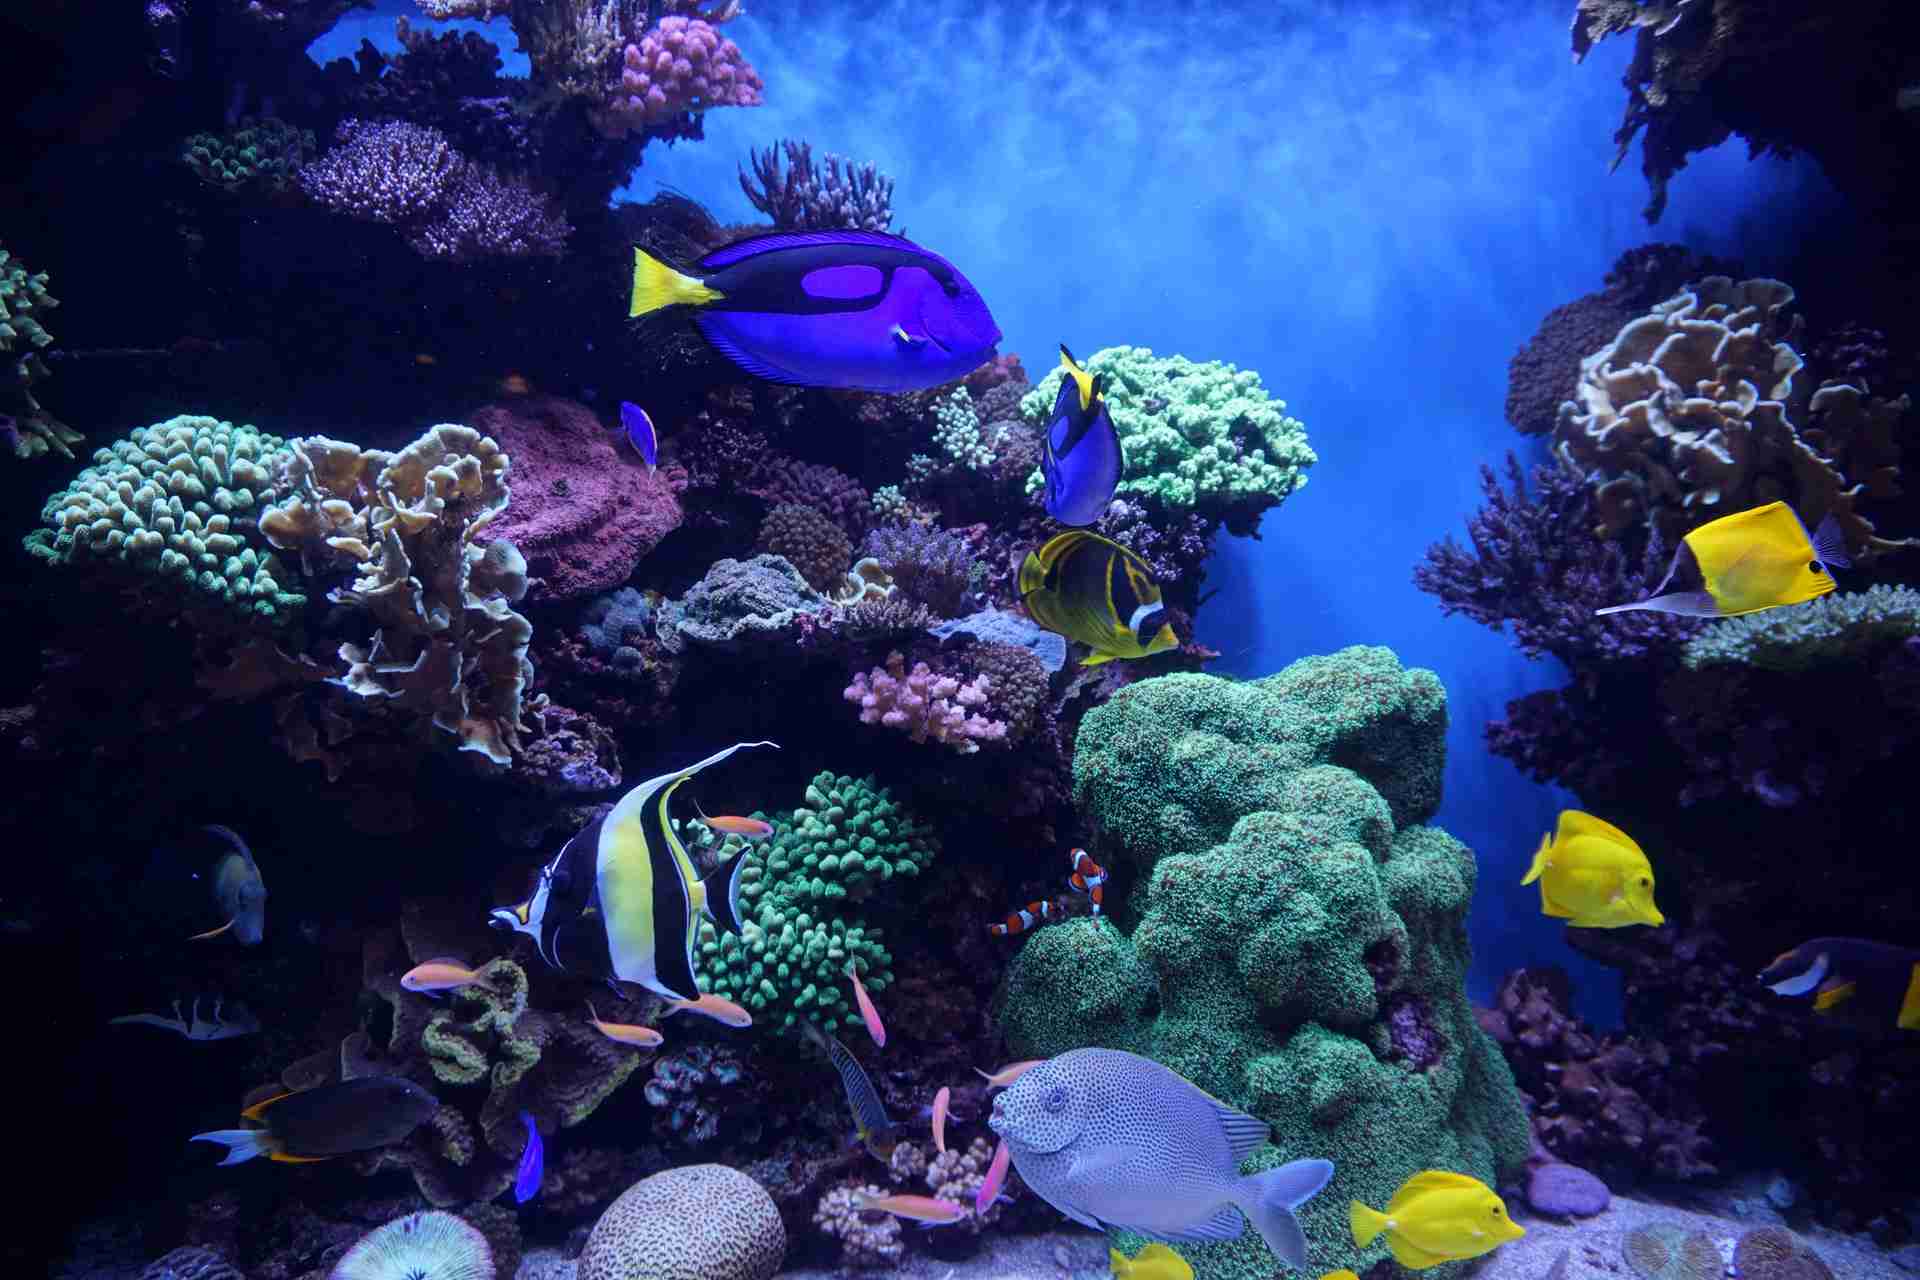 11 best things to do and activities in Lausanne, Switzerland,Aquatis Aquarium Lausanne Switzerland